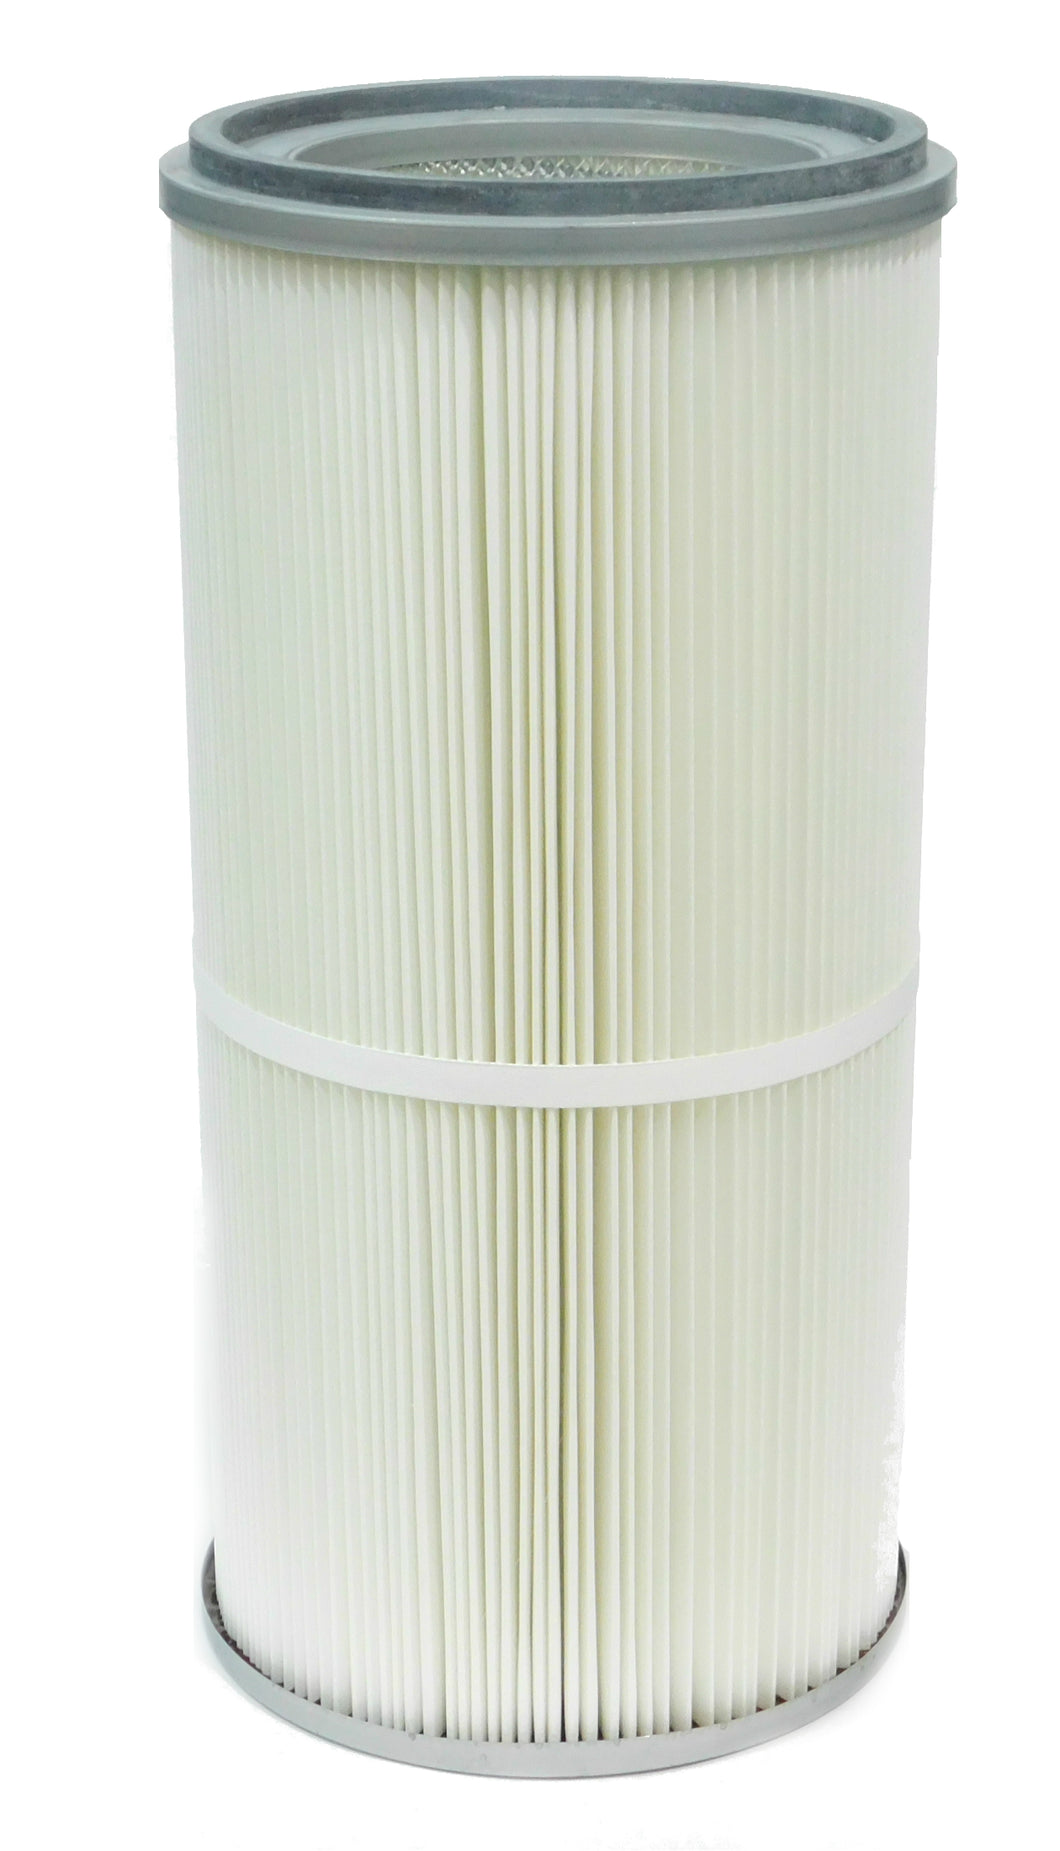 C506A1 - Apel - OEM Replacement Filter